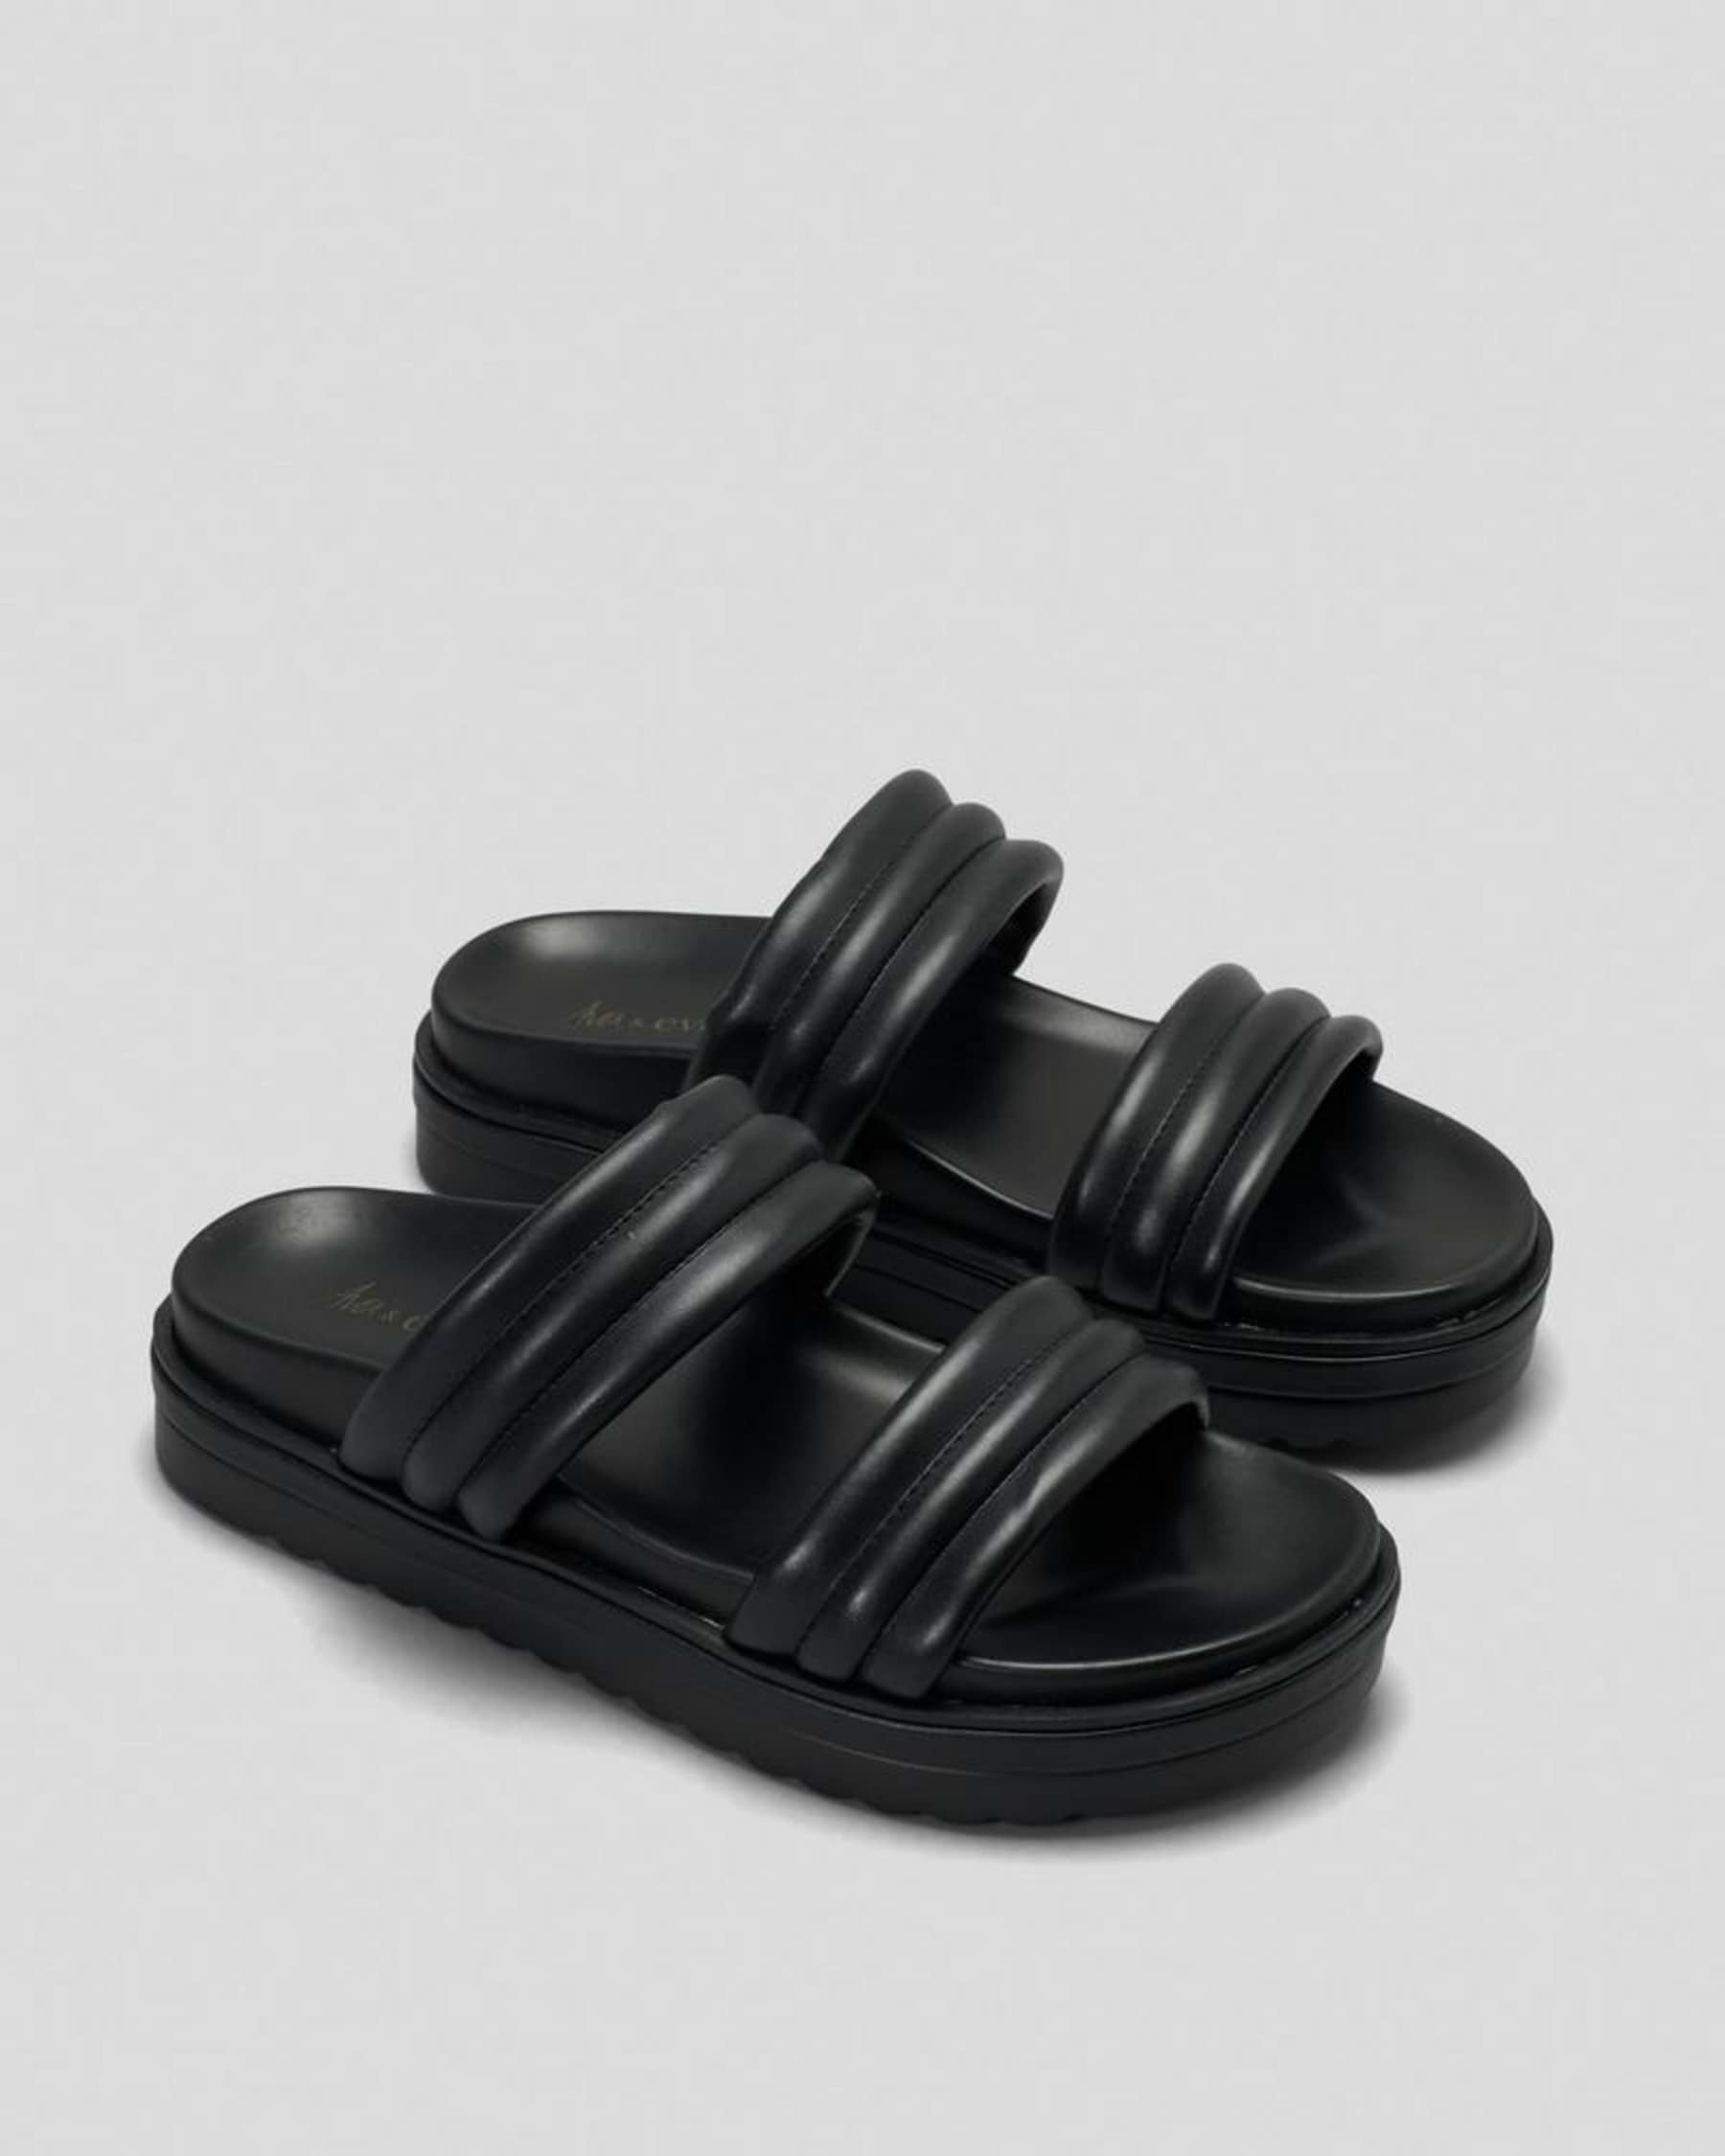 Ava And Ever Rhodes Slide Sandals In Black - Fast Shipping & Easy ...